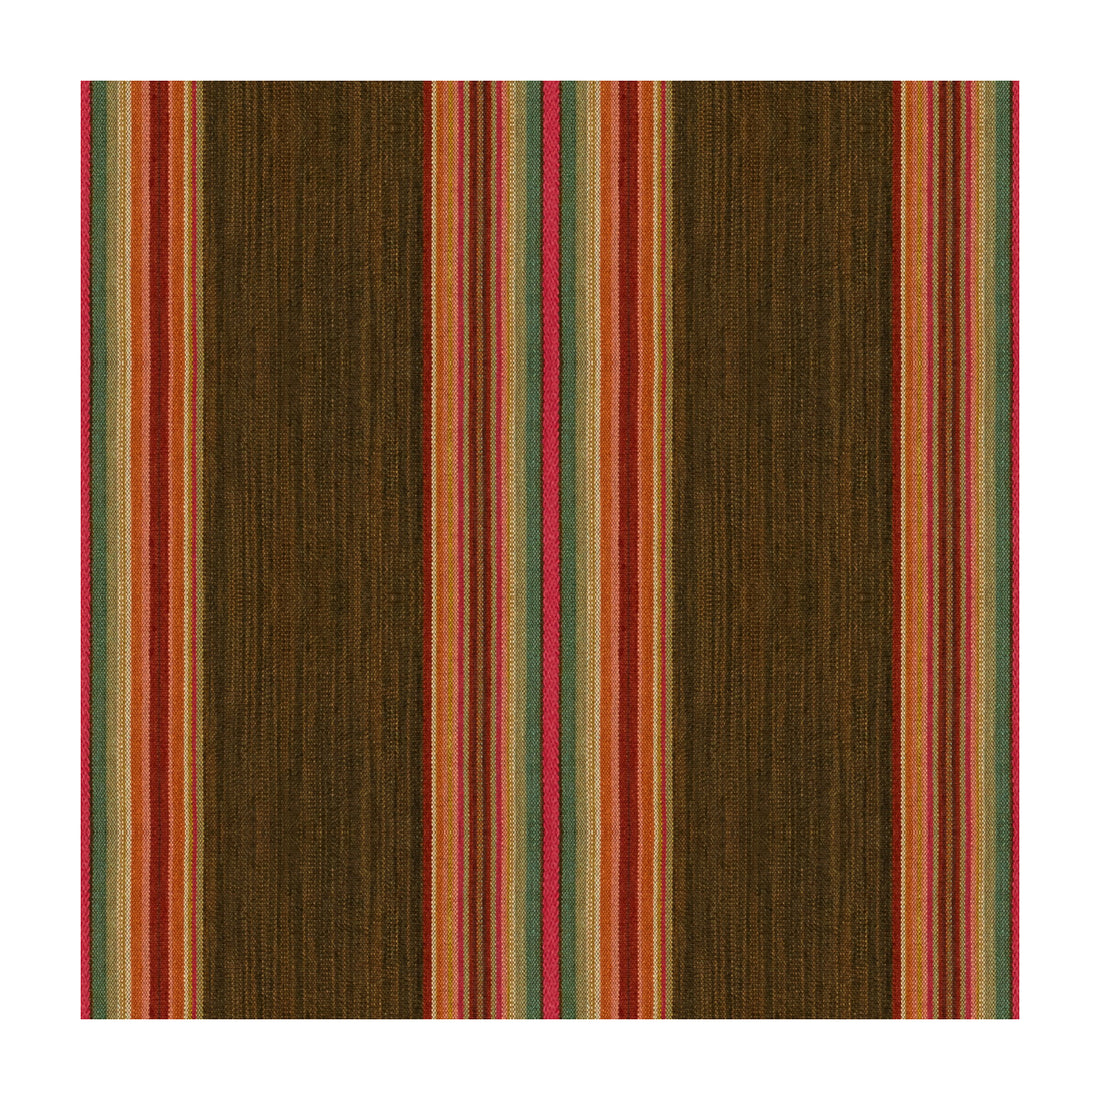 Gaban Stripe fabric in sundance color - pattern 33808.624.0 - by Kravet Design in the Museum Of New Mexico collection